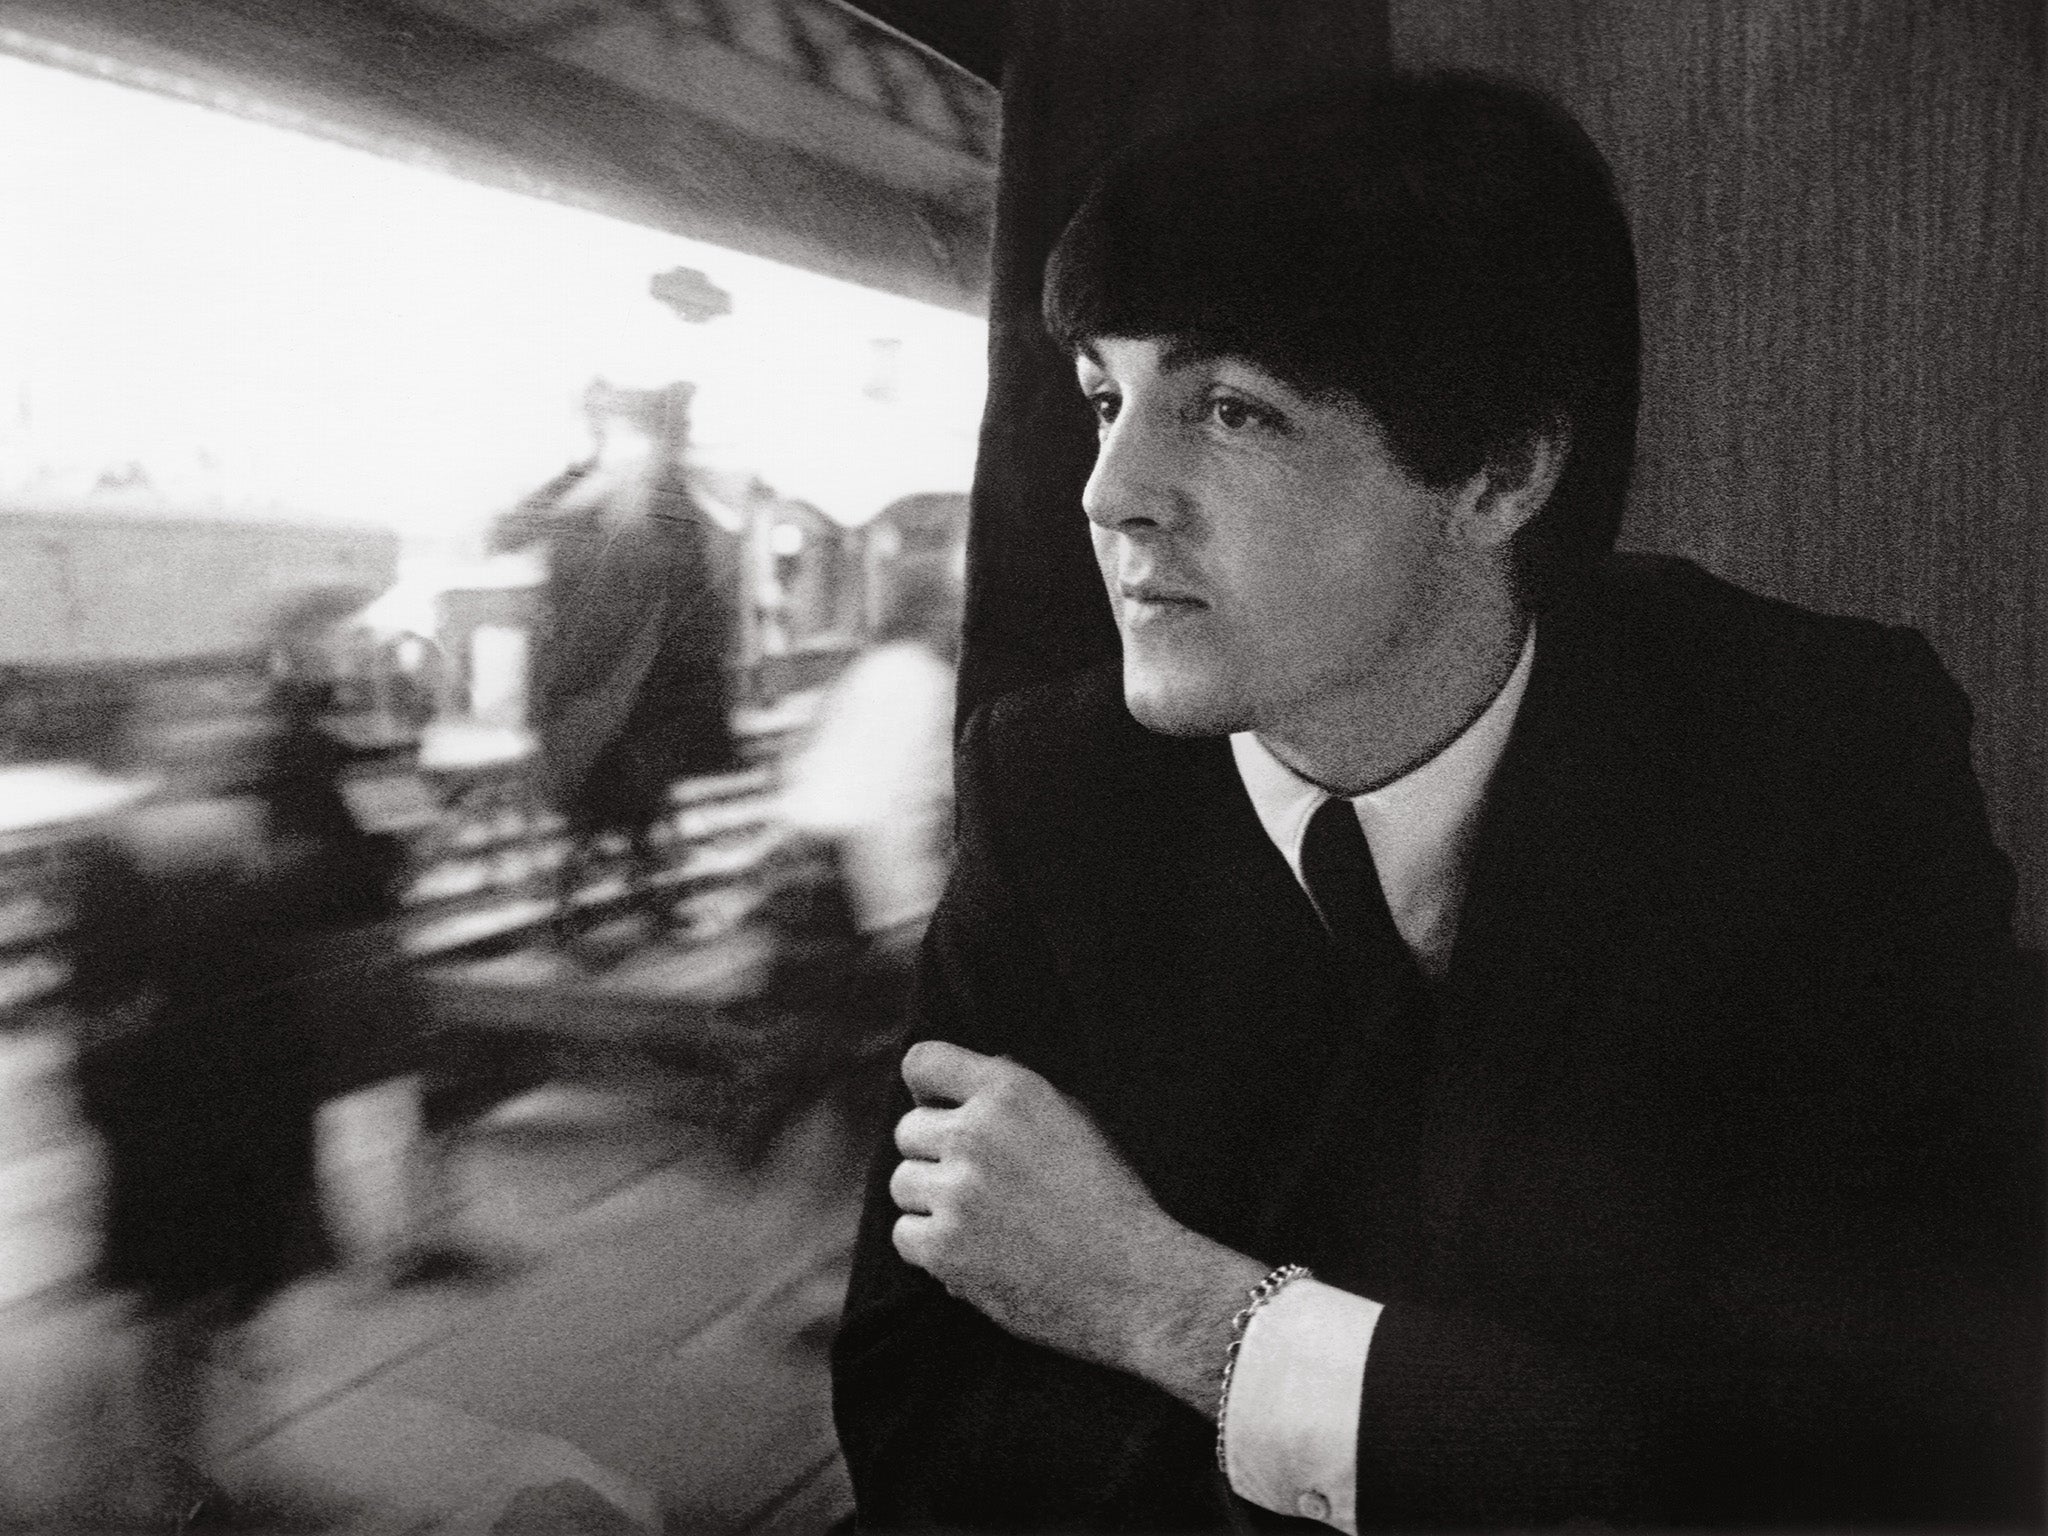 During the filming of ‘A Hard Day’s Night’ on a train leaving Paddington station in 1964